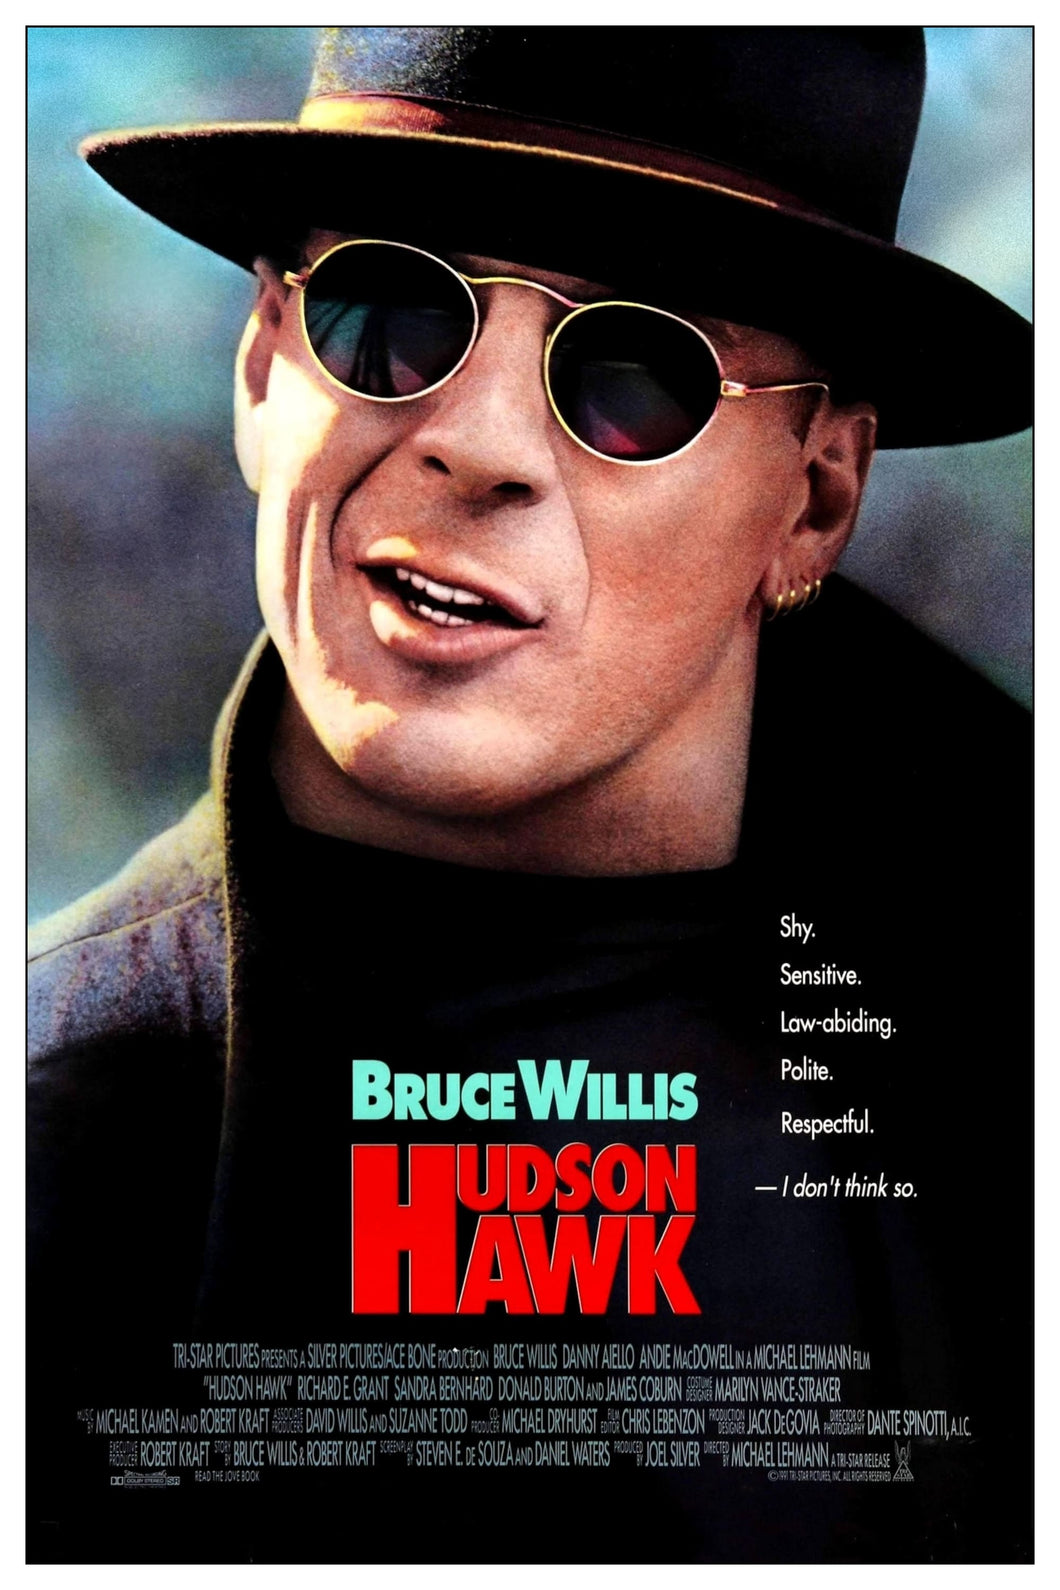 Hudson Hawk (1991) Movie Poster High Quality Glossy Paper A1 A2 A3 A4 A3 Framed or Unframed!!!